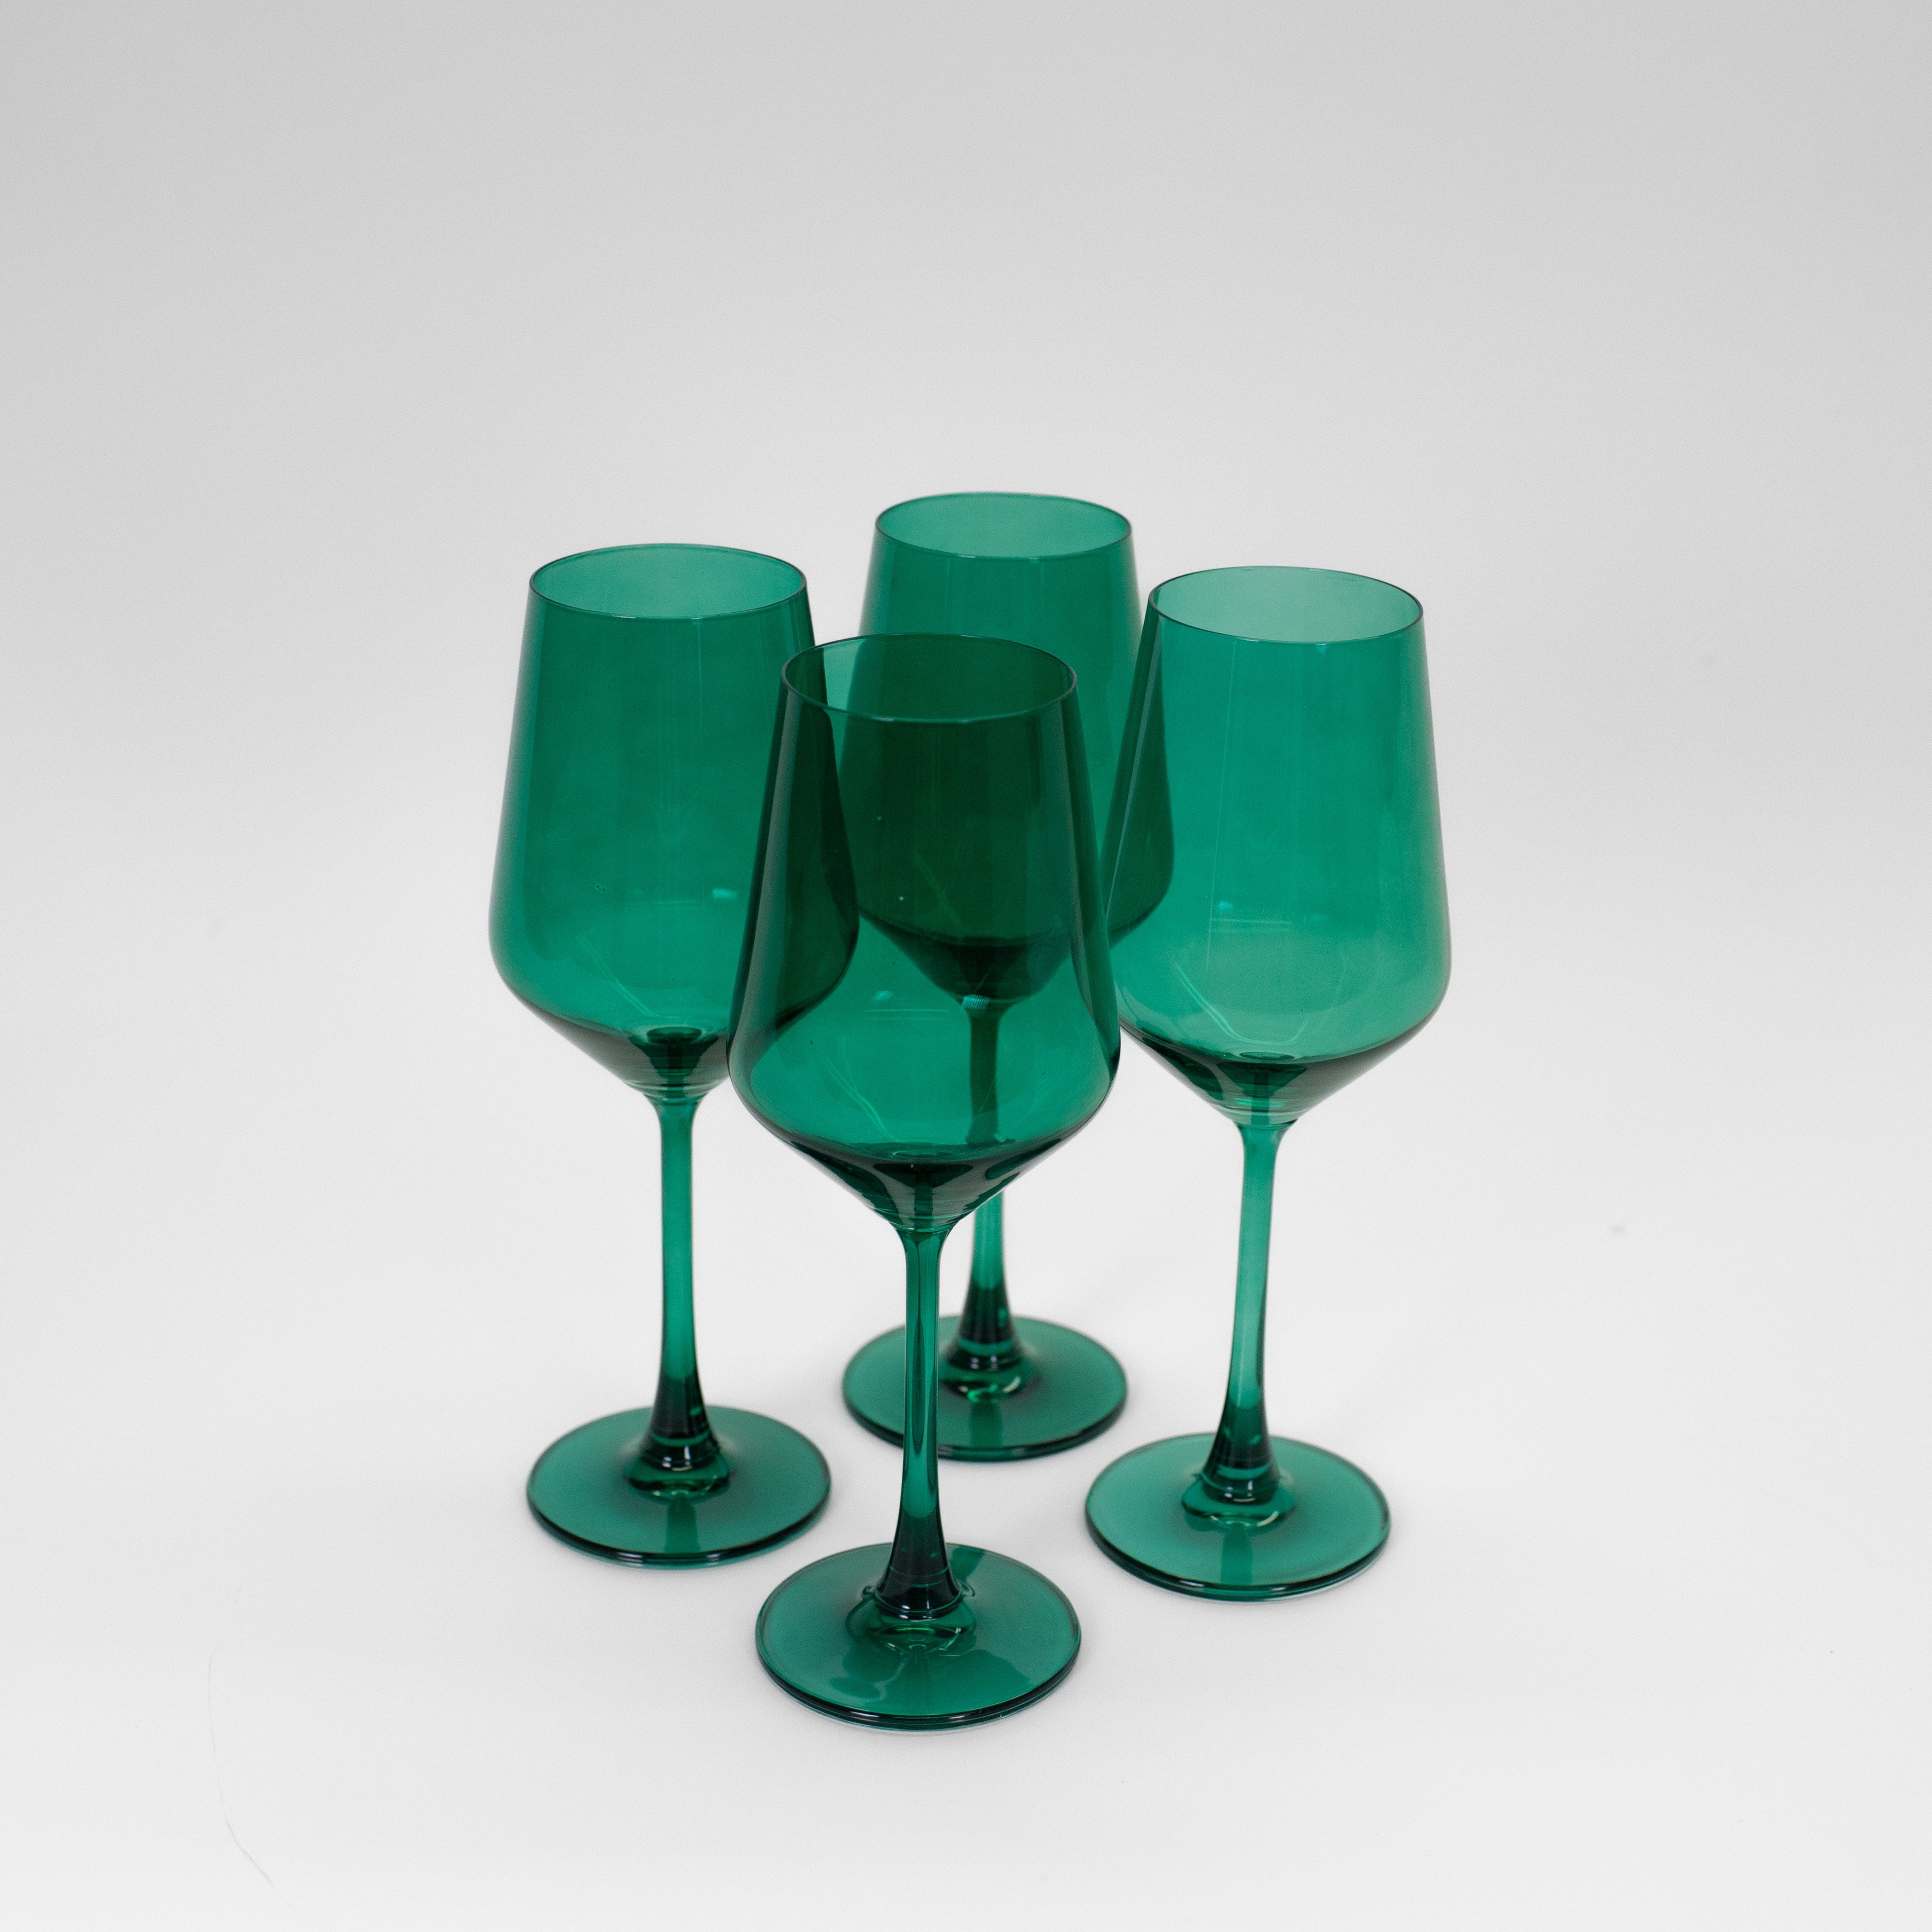 Everything Collection - Shop This Versatile Set of 12 Colored Wine Glasses  – glasshauseco